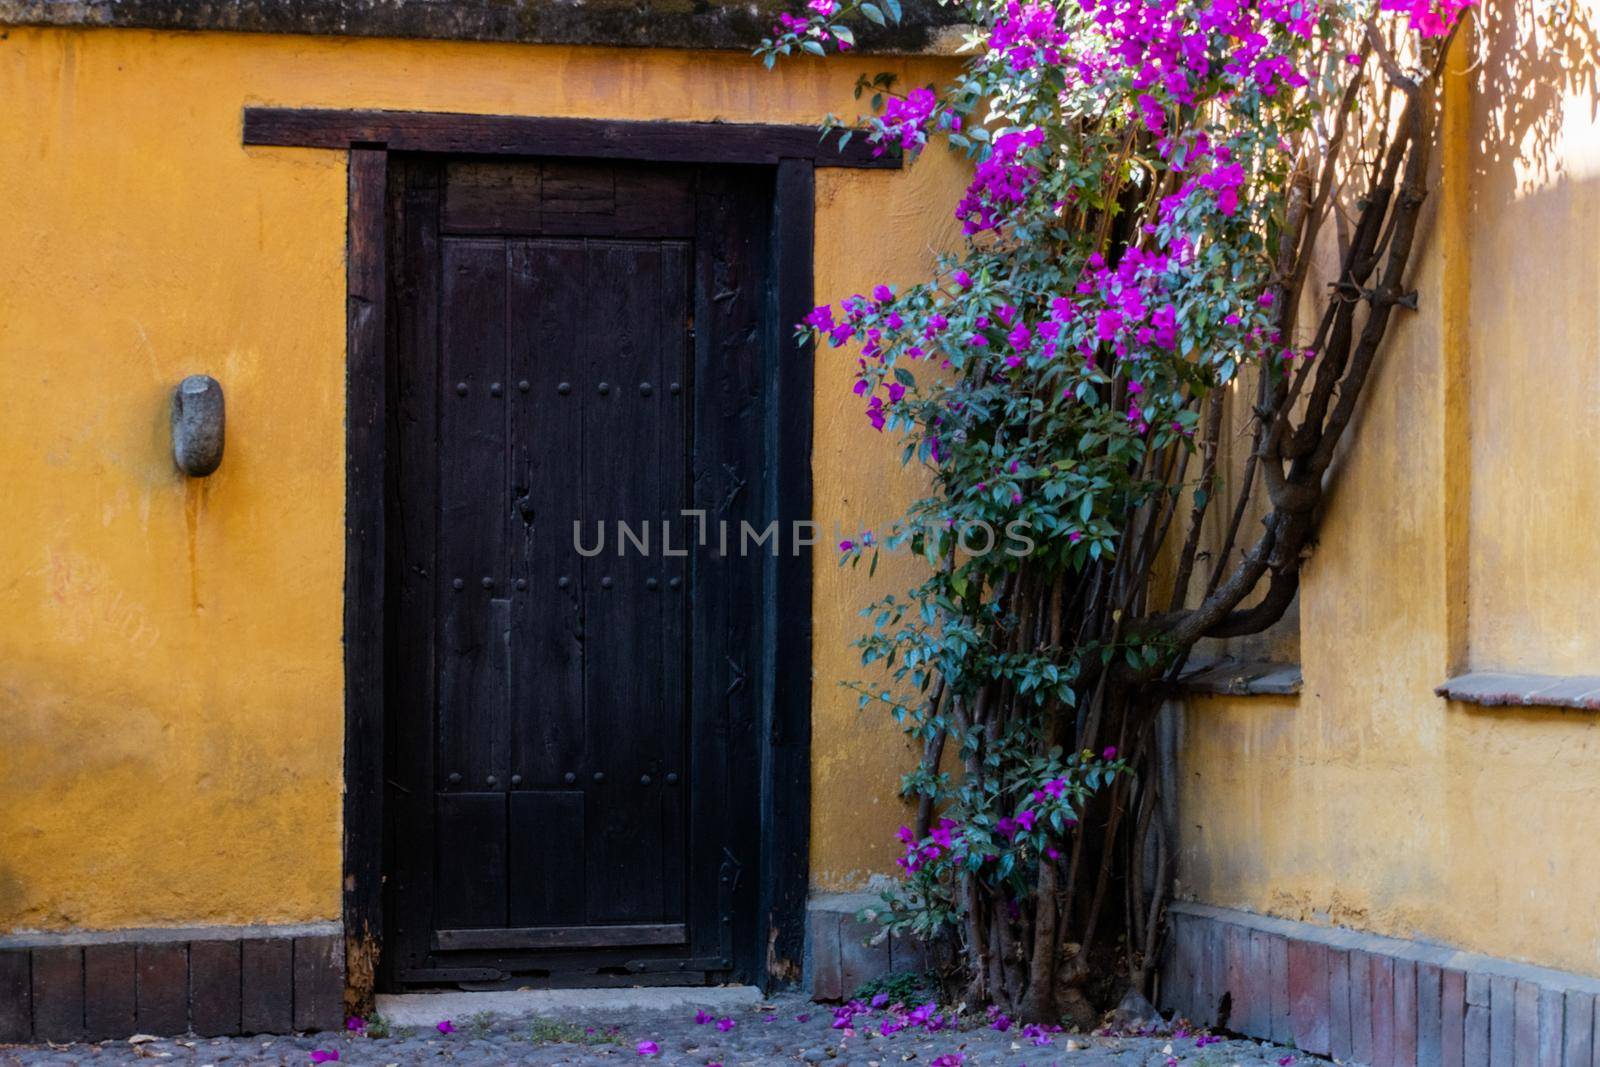 Classic yellow house and beautiful flowers in Mexico City by Kanelbulle